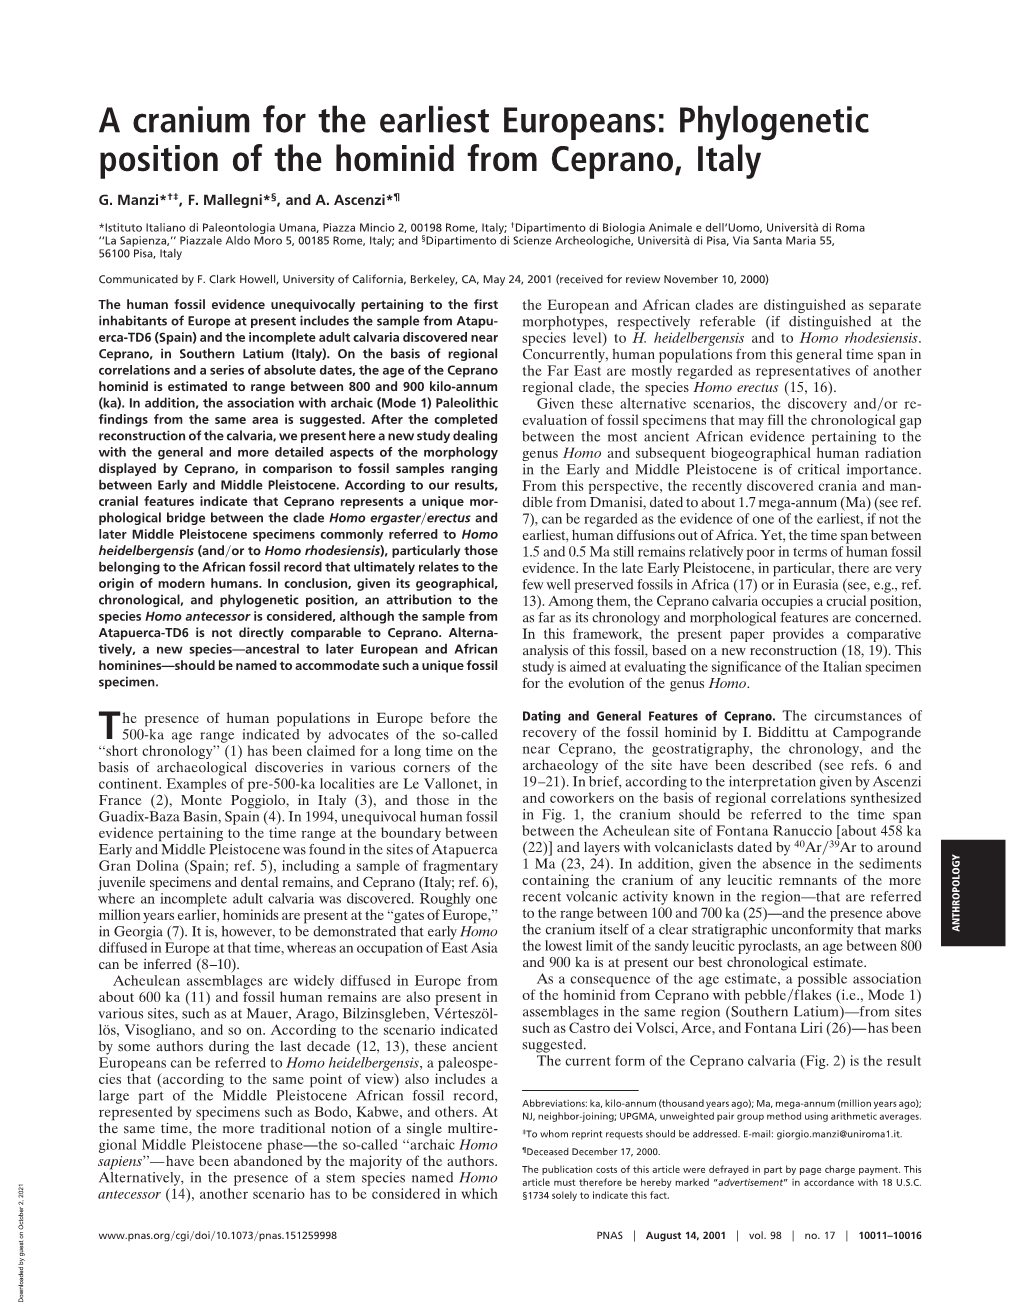 Phylogenetic Position of the Hominid from Ceprano, Italy